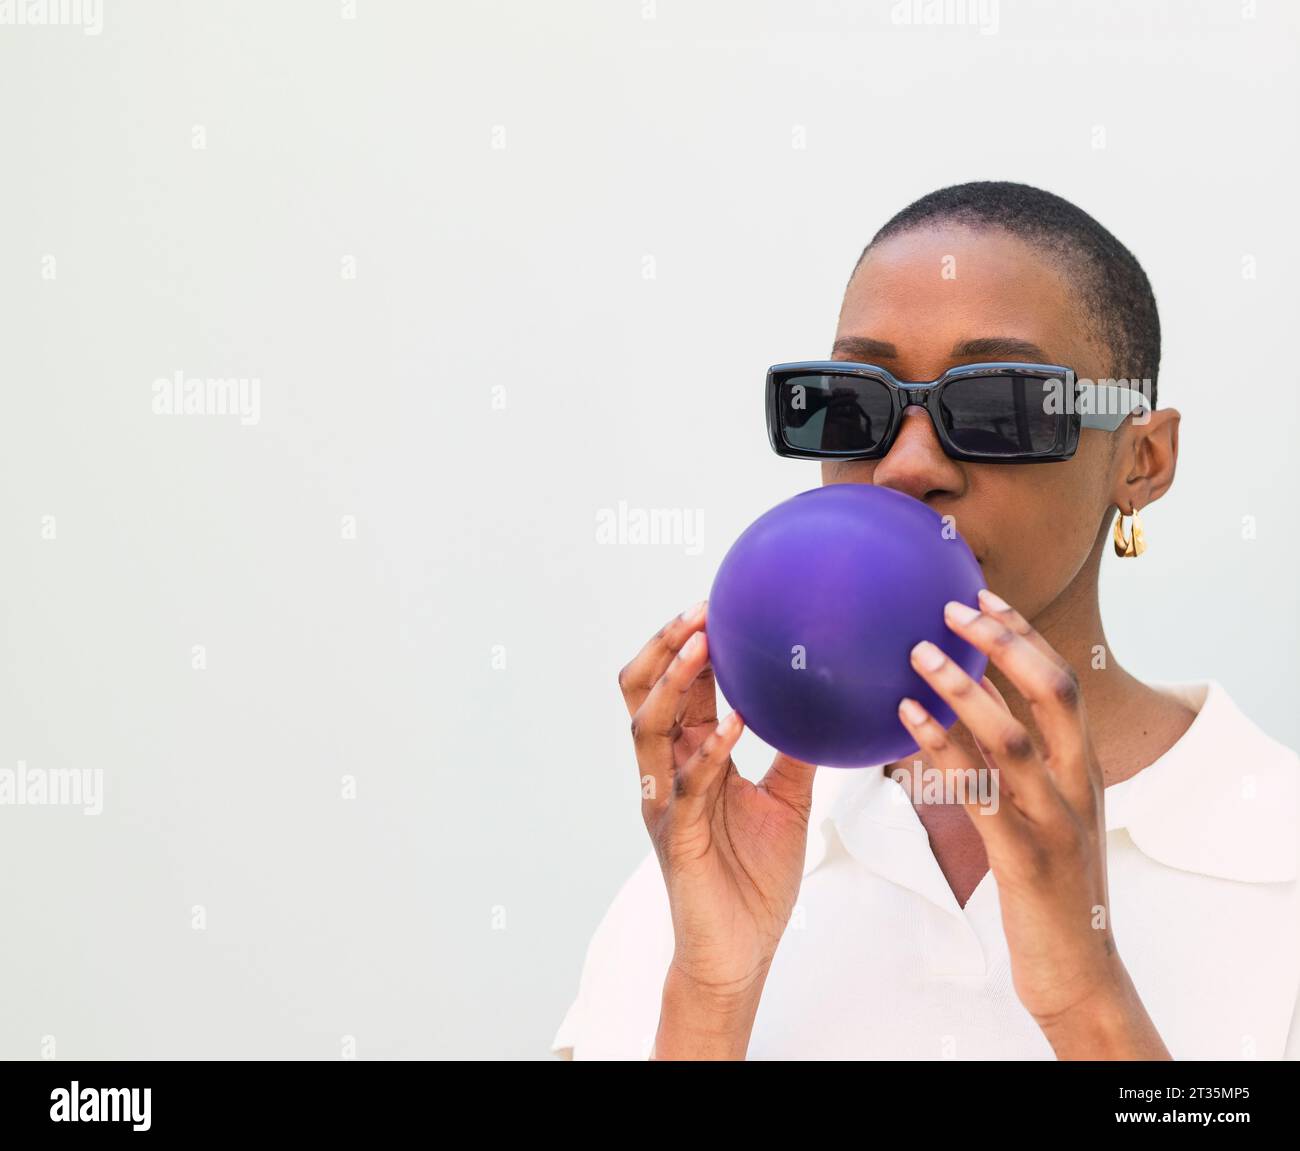 Young woman wearing sunglasses blowing balloon against white background Stock Photo